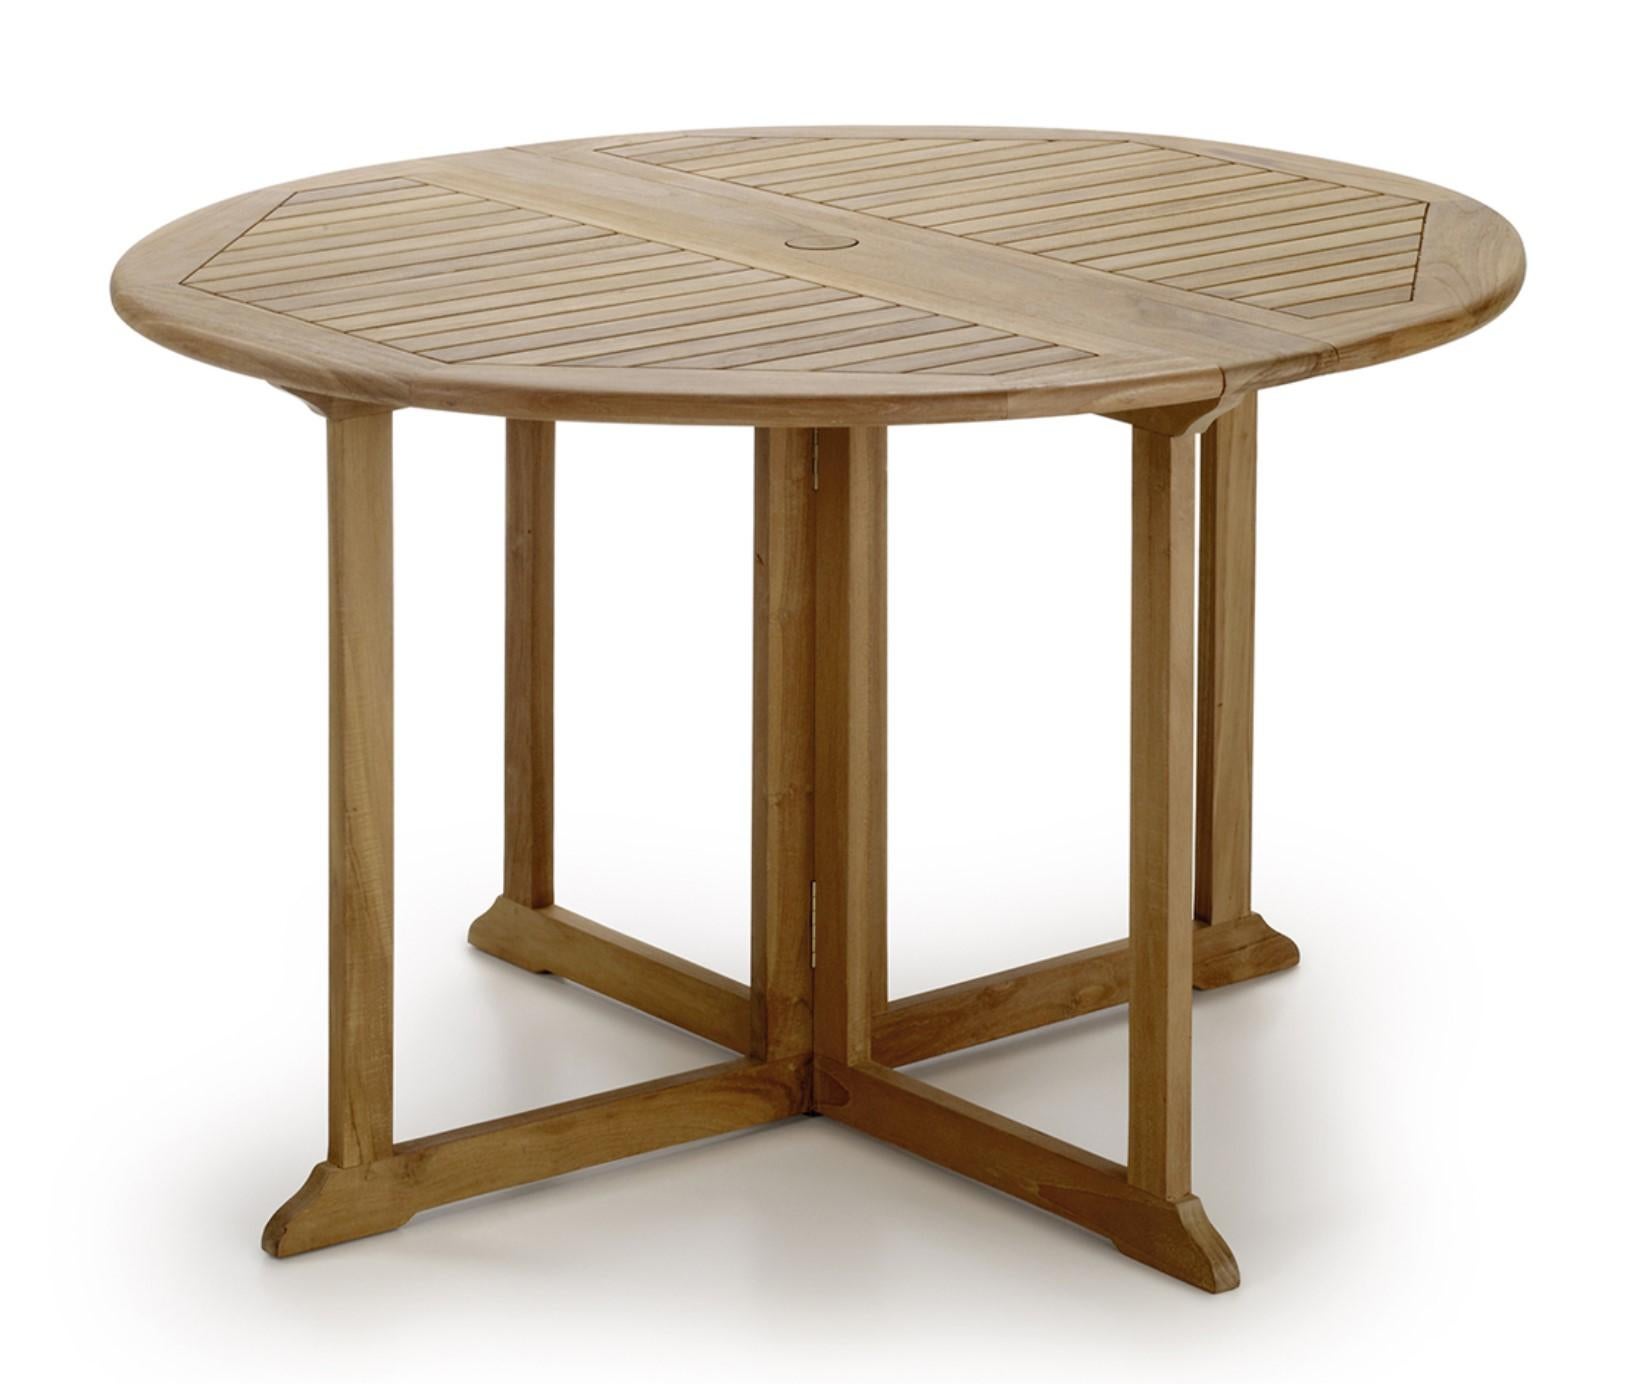 New teak round foldable dining table, indoor and outdoor.